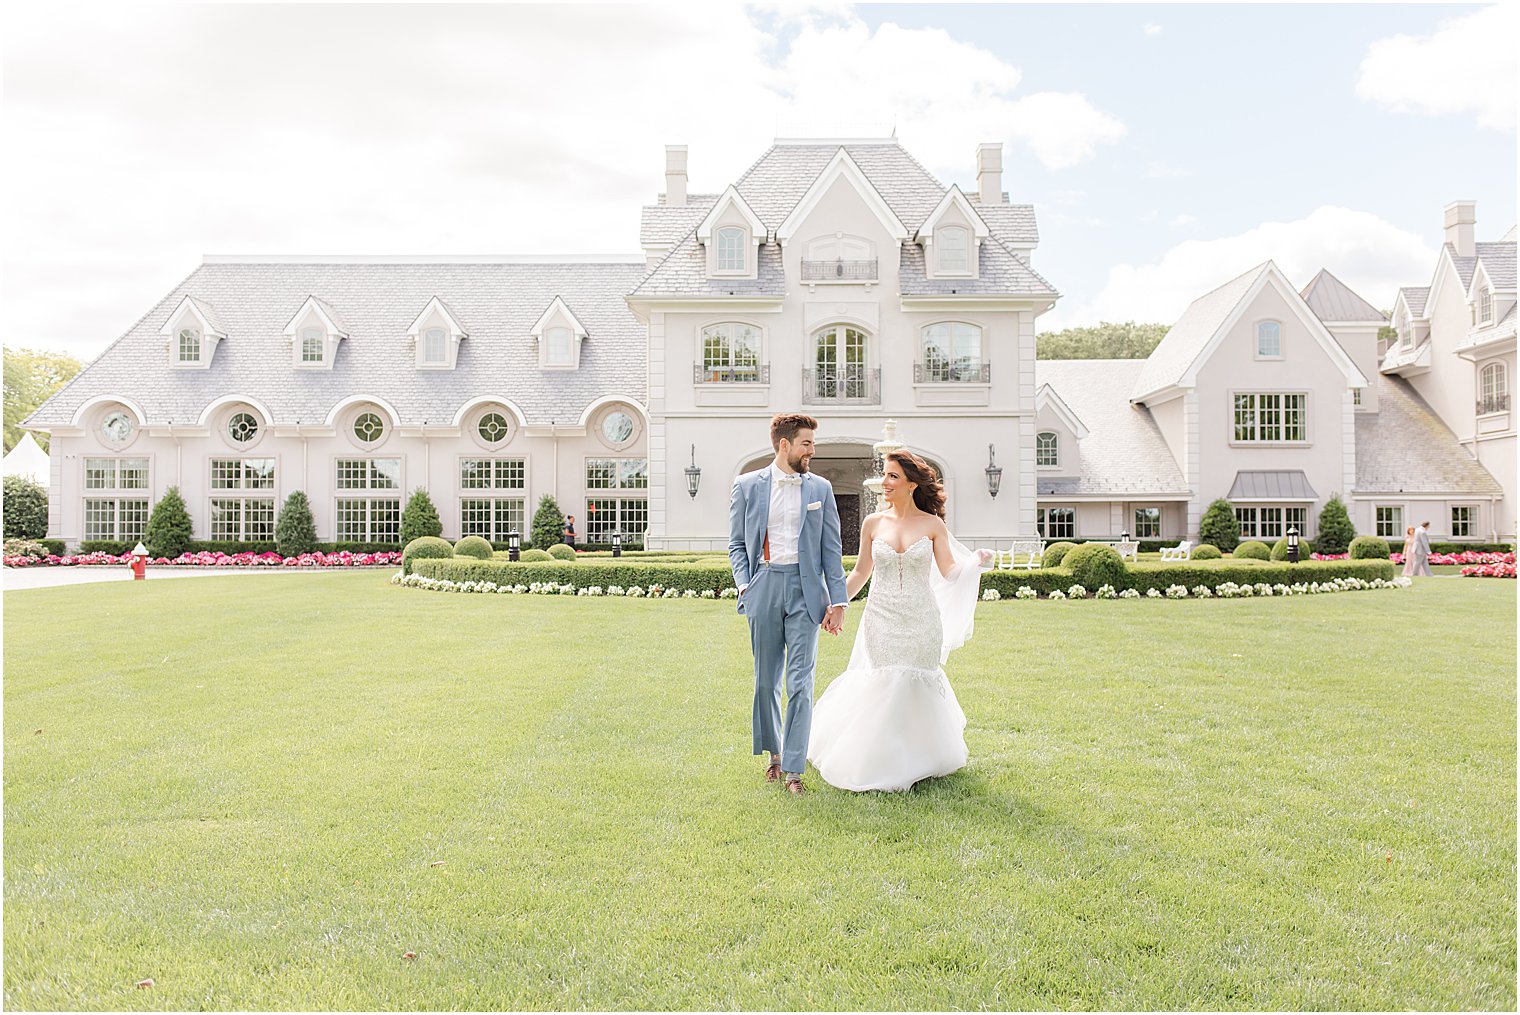 newlyweds hold hands walking on lawn during portraits at Park Chateau Estate